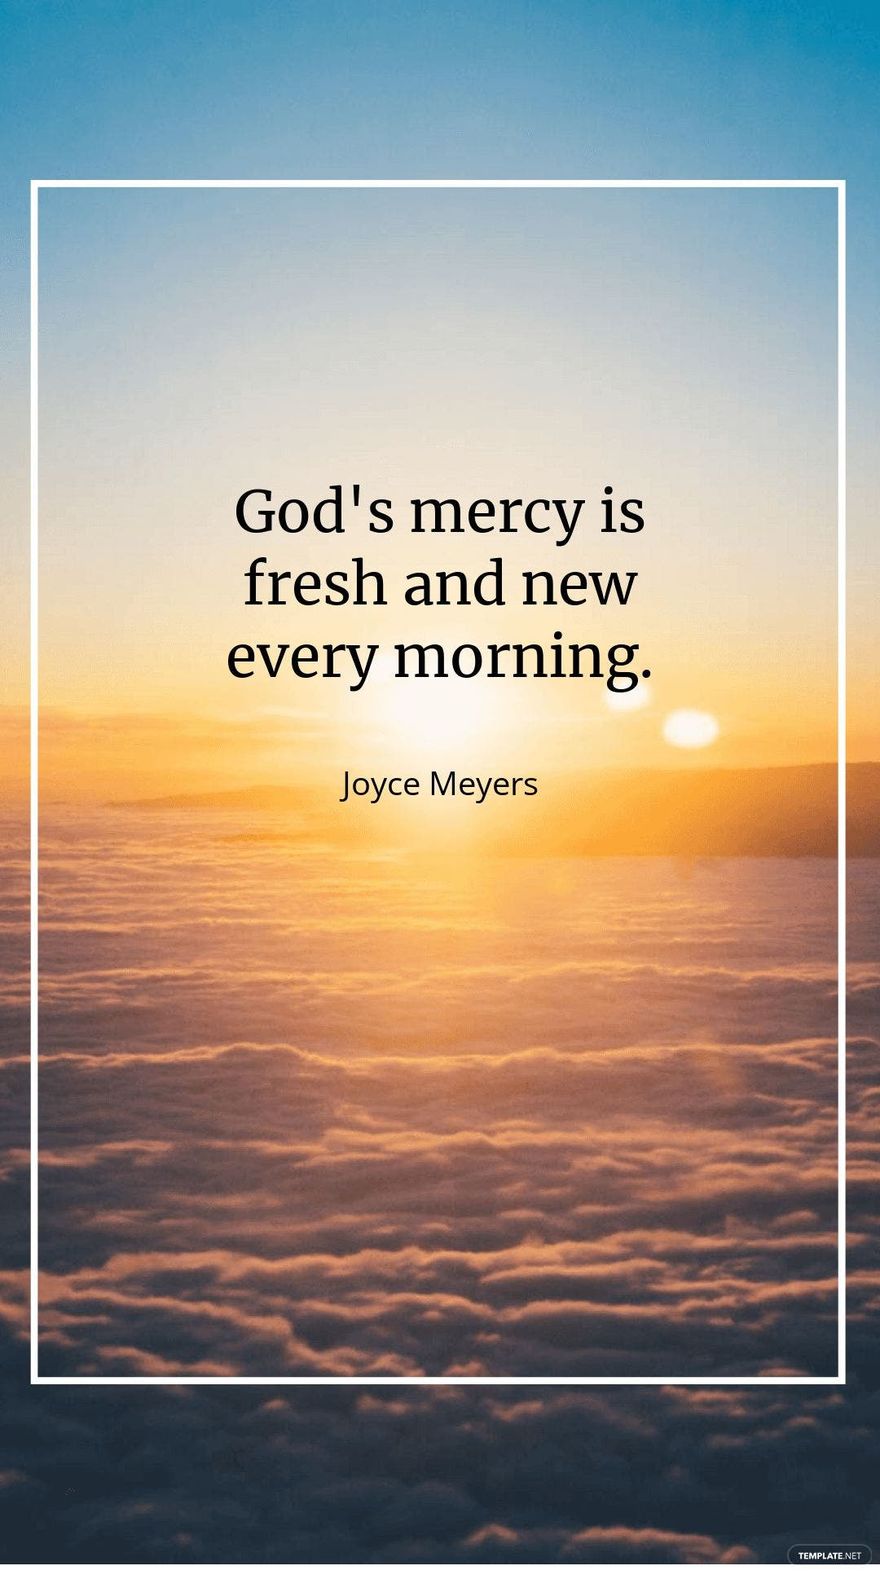 Joyce Meyers - God's mercy is fresh and new every morning.